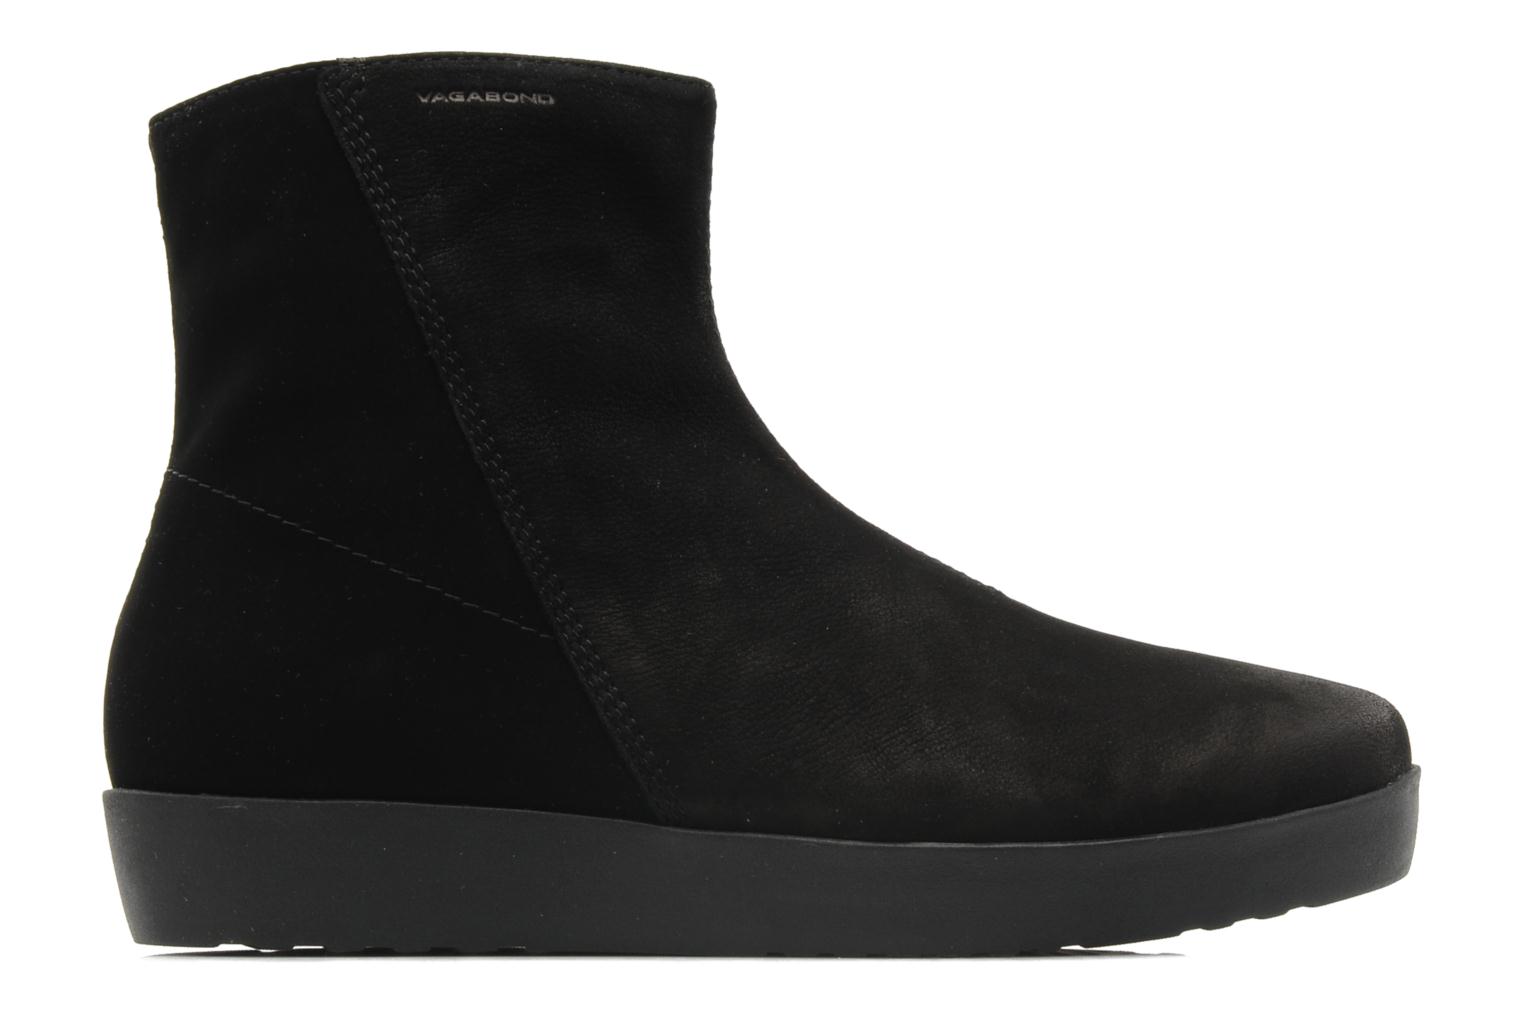 Vagabond EDIE 3425 212 Ankle boots in Black at Sarenza.co.uk (100006)